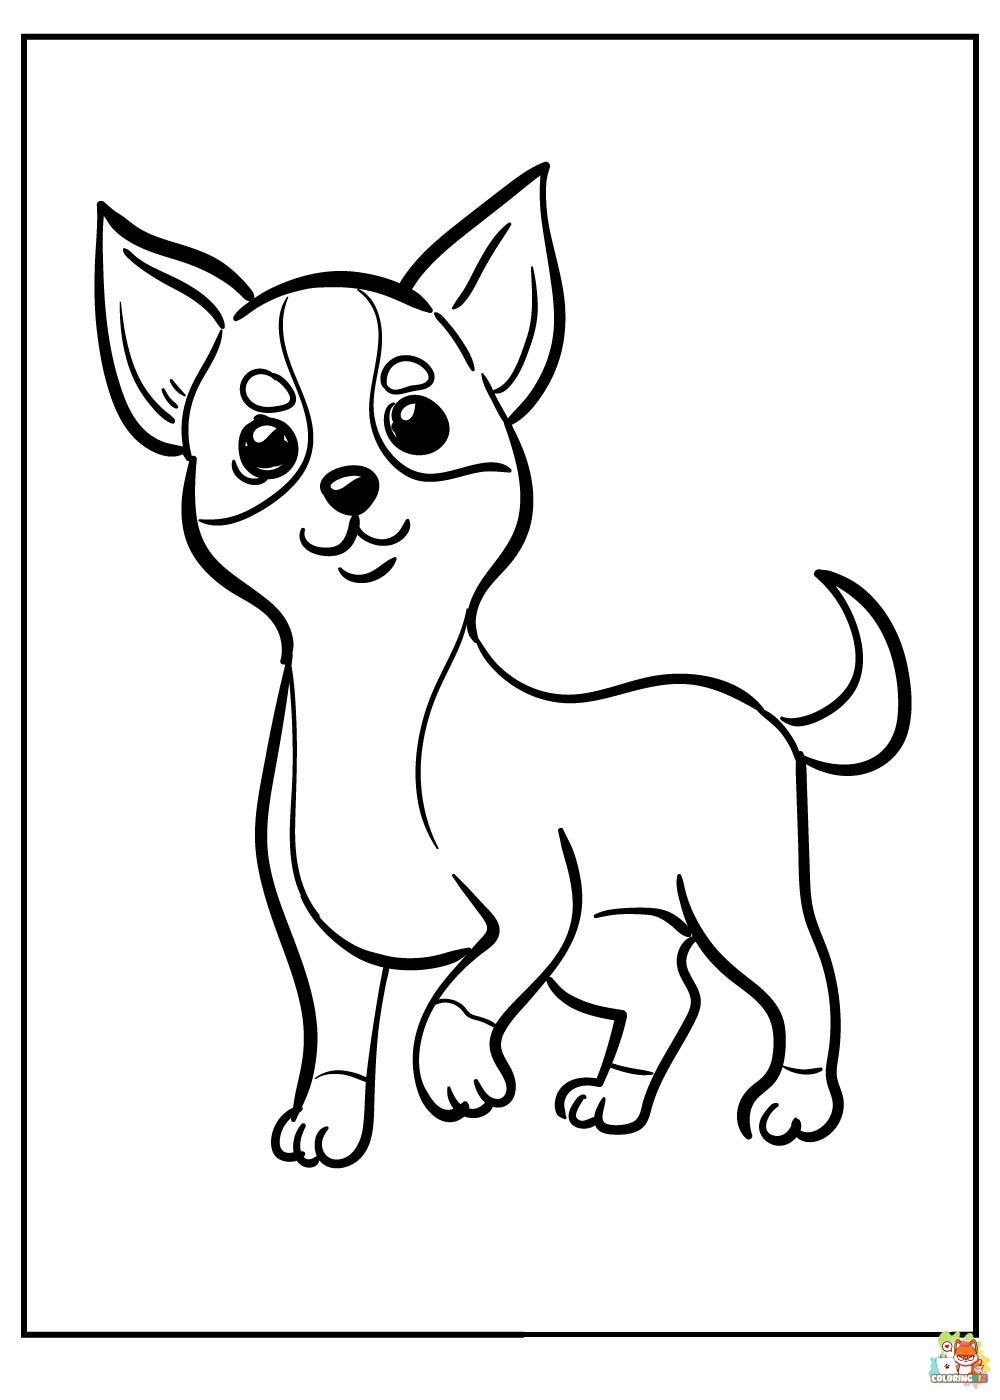 Pomeranian and Chihuahua Coloring Pages 4